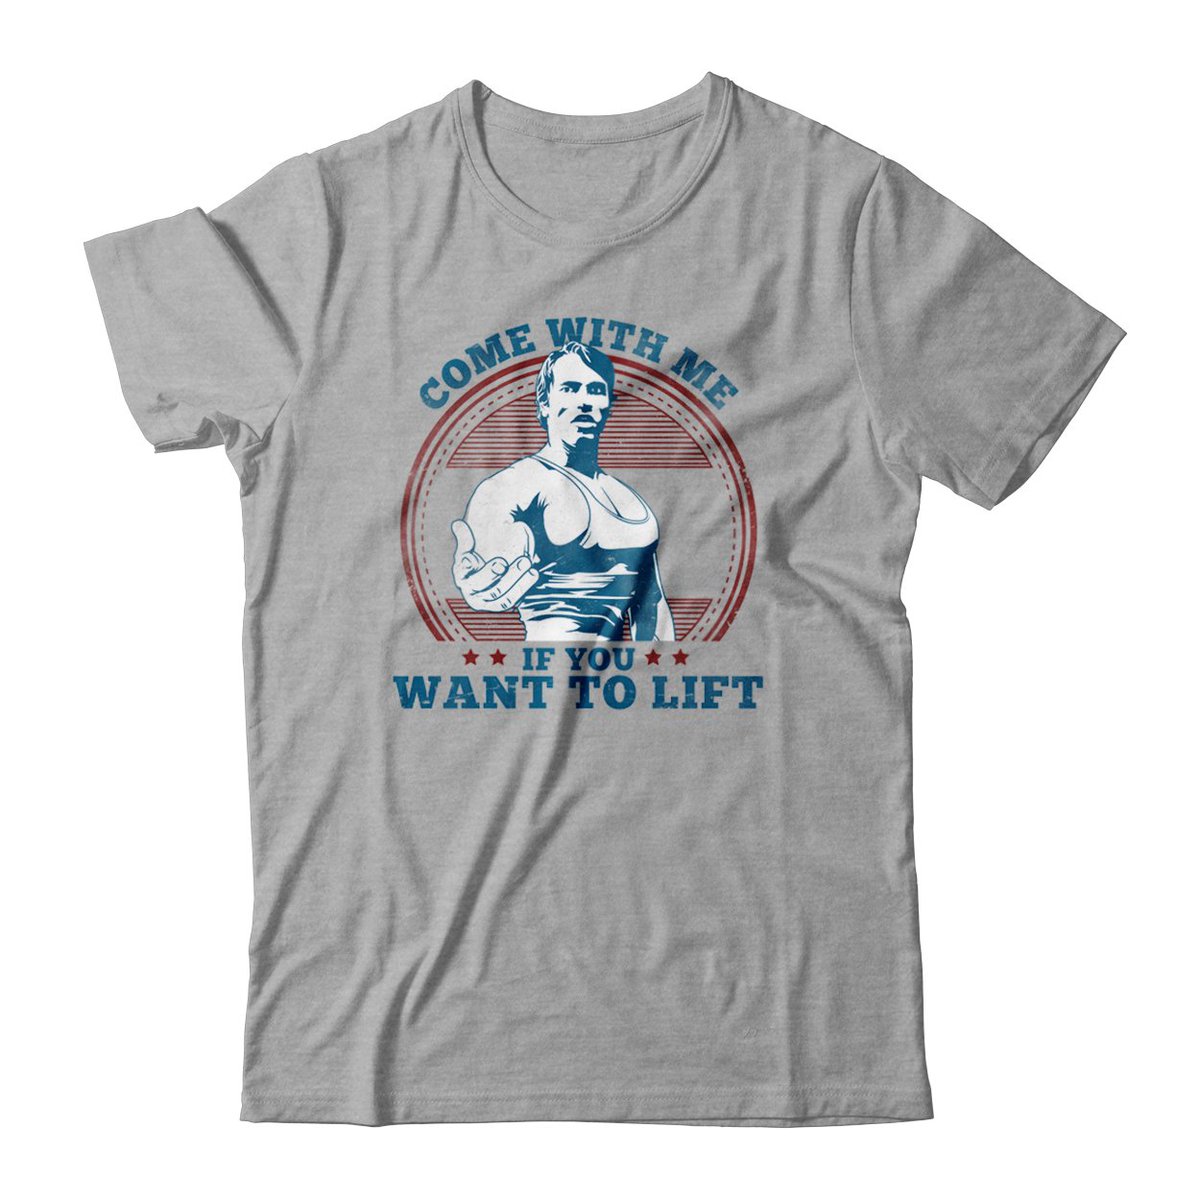 RT @TANCfitness: Awesome shirt for a great cause - Don't miss out @Schwarzenegger #comewithmeifyouwanttolift https://t.co/XEzfXFURMH https:…